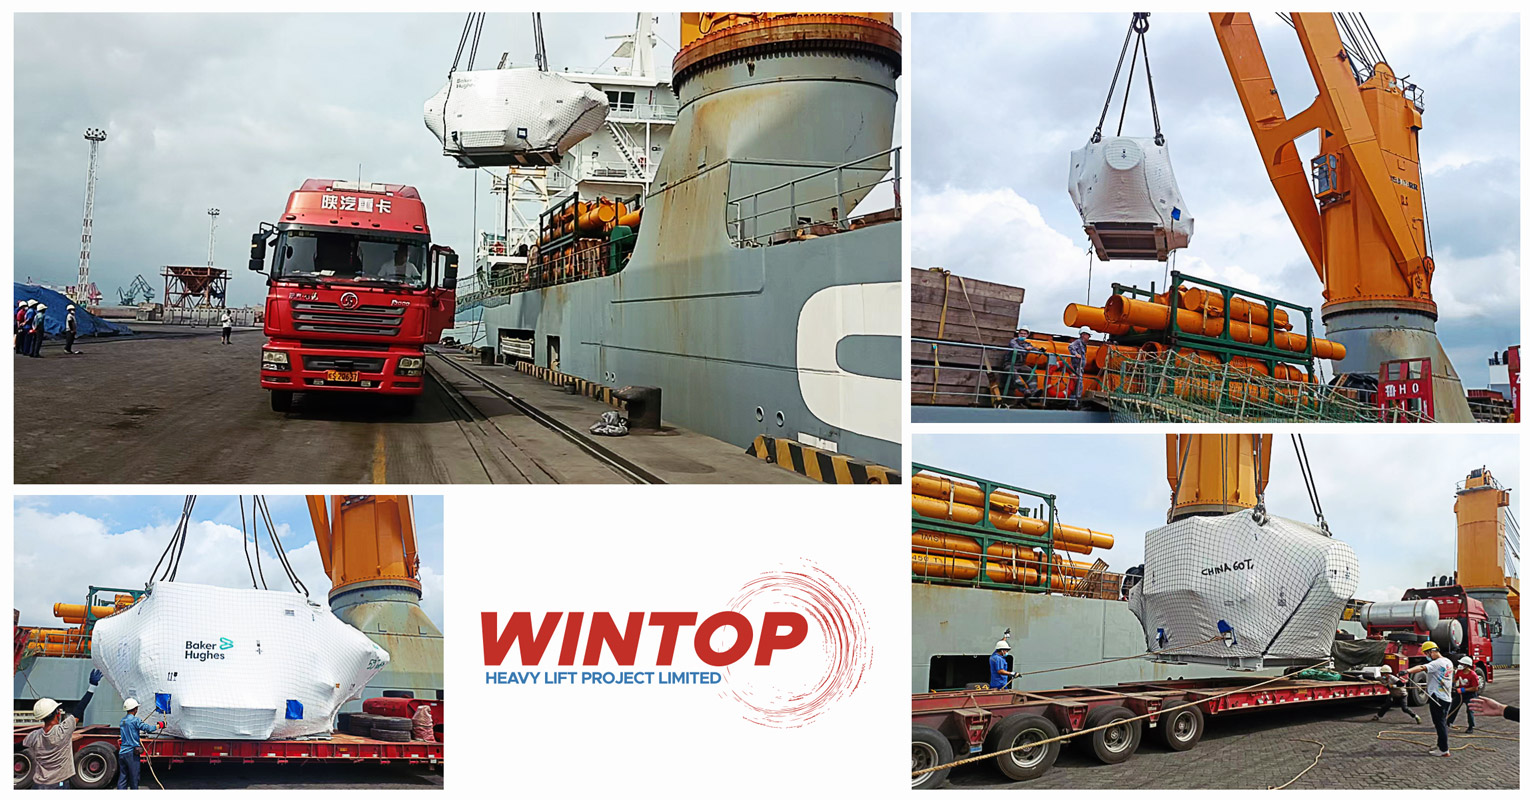 Wintop Heavy Lift Shipped Commissioning & Start-up Spare Parts from Xiamen, China to Livorno, Italy